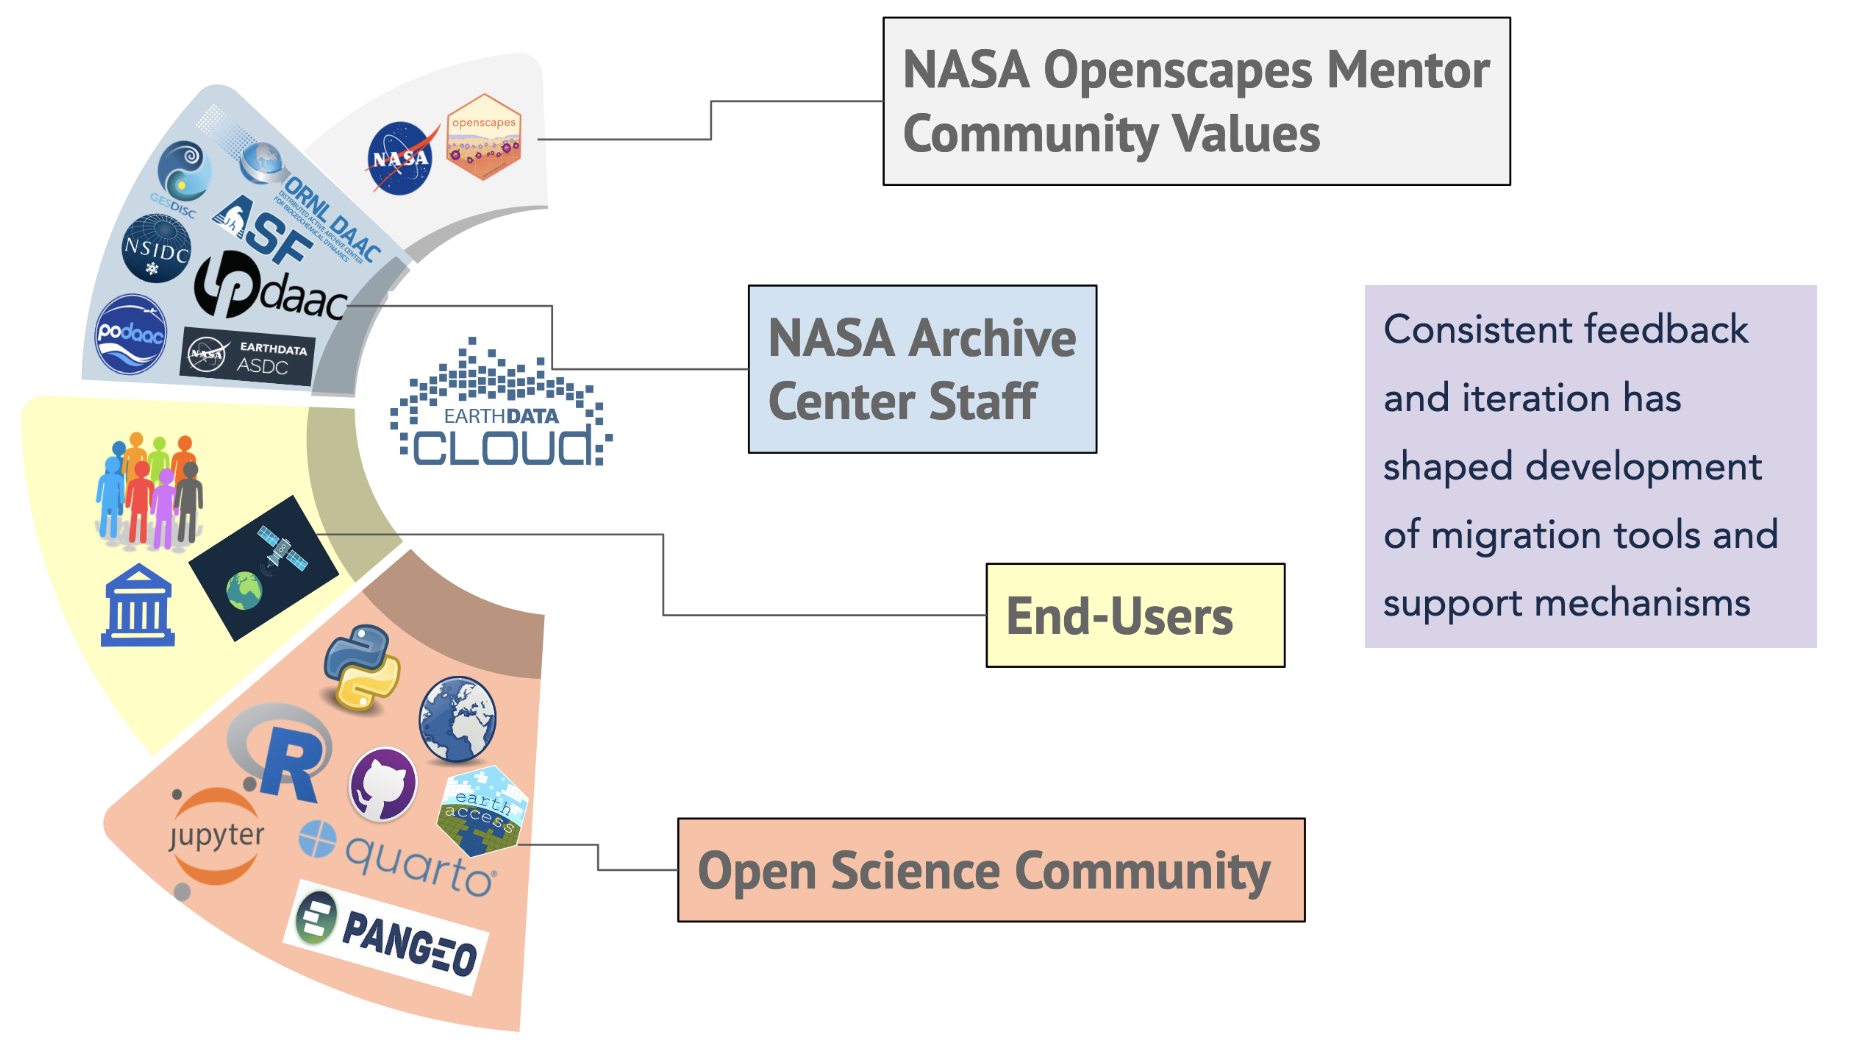 figure with spiralling shell shape where each section has logos representing a segment of people who work with NASA Earthdata. Sections are labeled NASA Openscapes Mentor Community Values, NASA Archive Center Staff, Open Science Community. Text in box to right says 'Consistent feedback and iteration has shaped development of migration tools and support mechanisms'